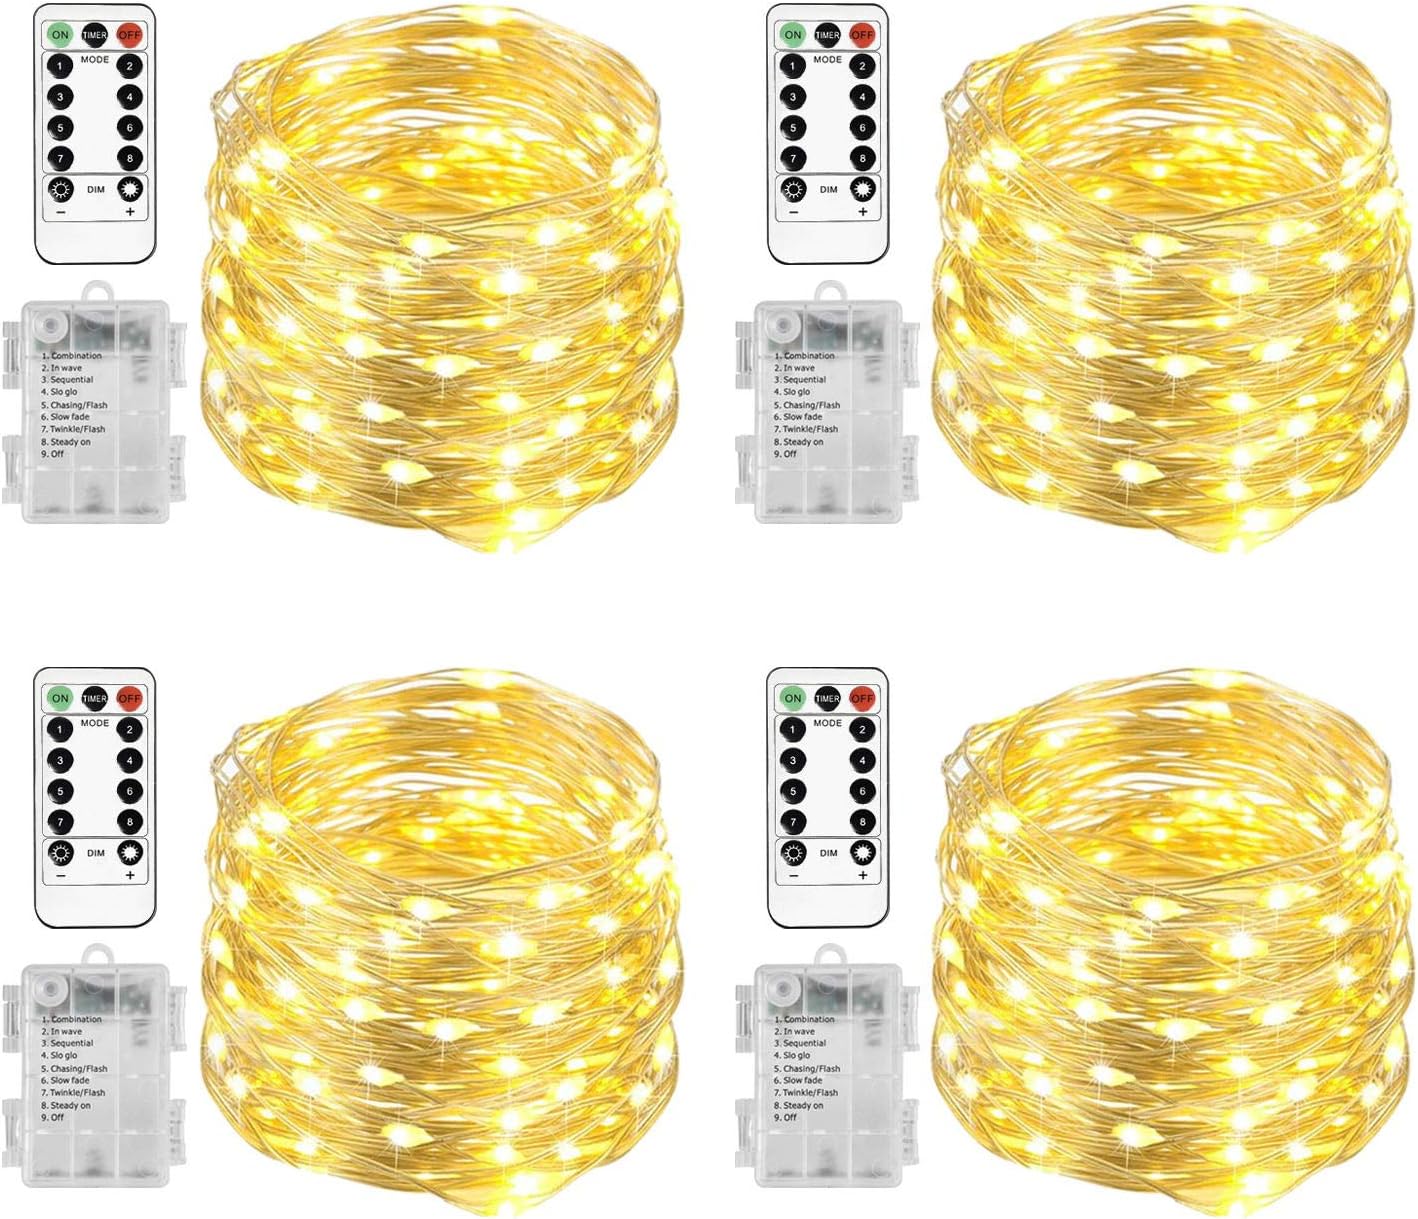 Homemory 4 Pack 20 Ft 60 LED Fairy Lights Battery Operated Christmas Lights with Remote Waterproof 8 Modes Firefly Twinkle String Lights for Party Bedroom Wedding Halloween Decorations